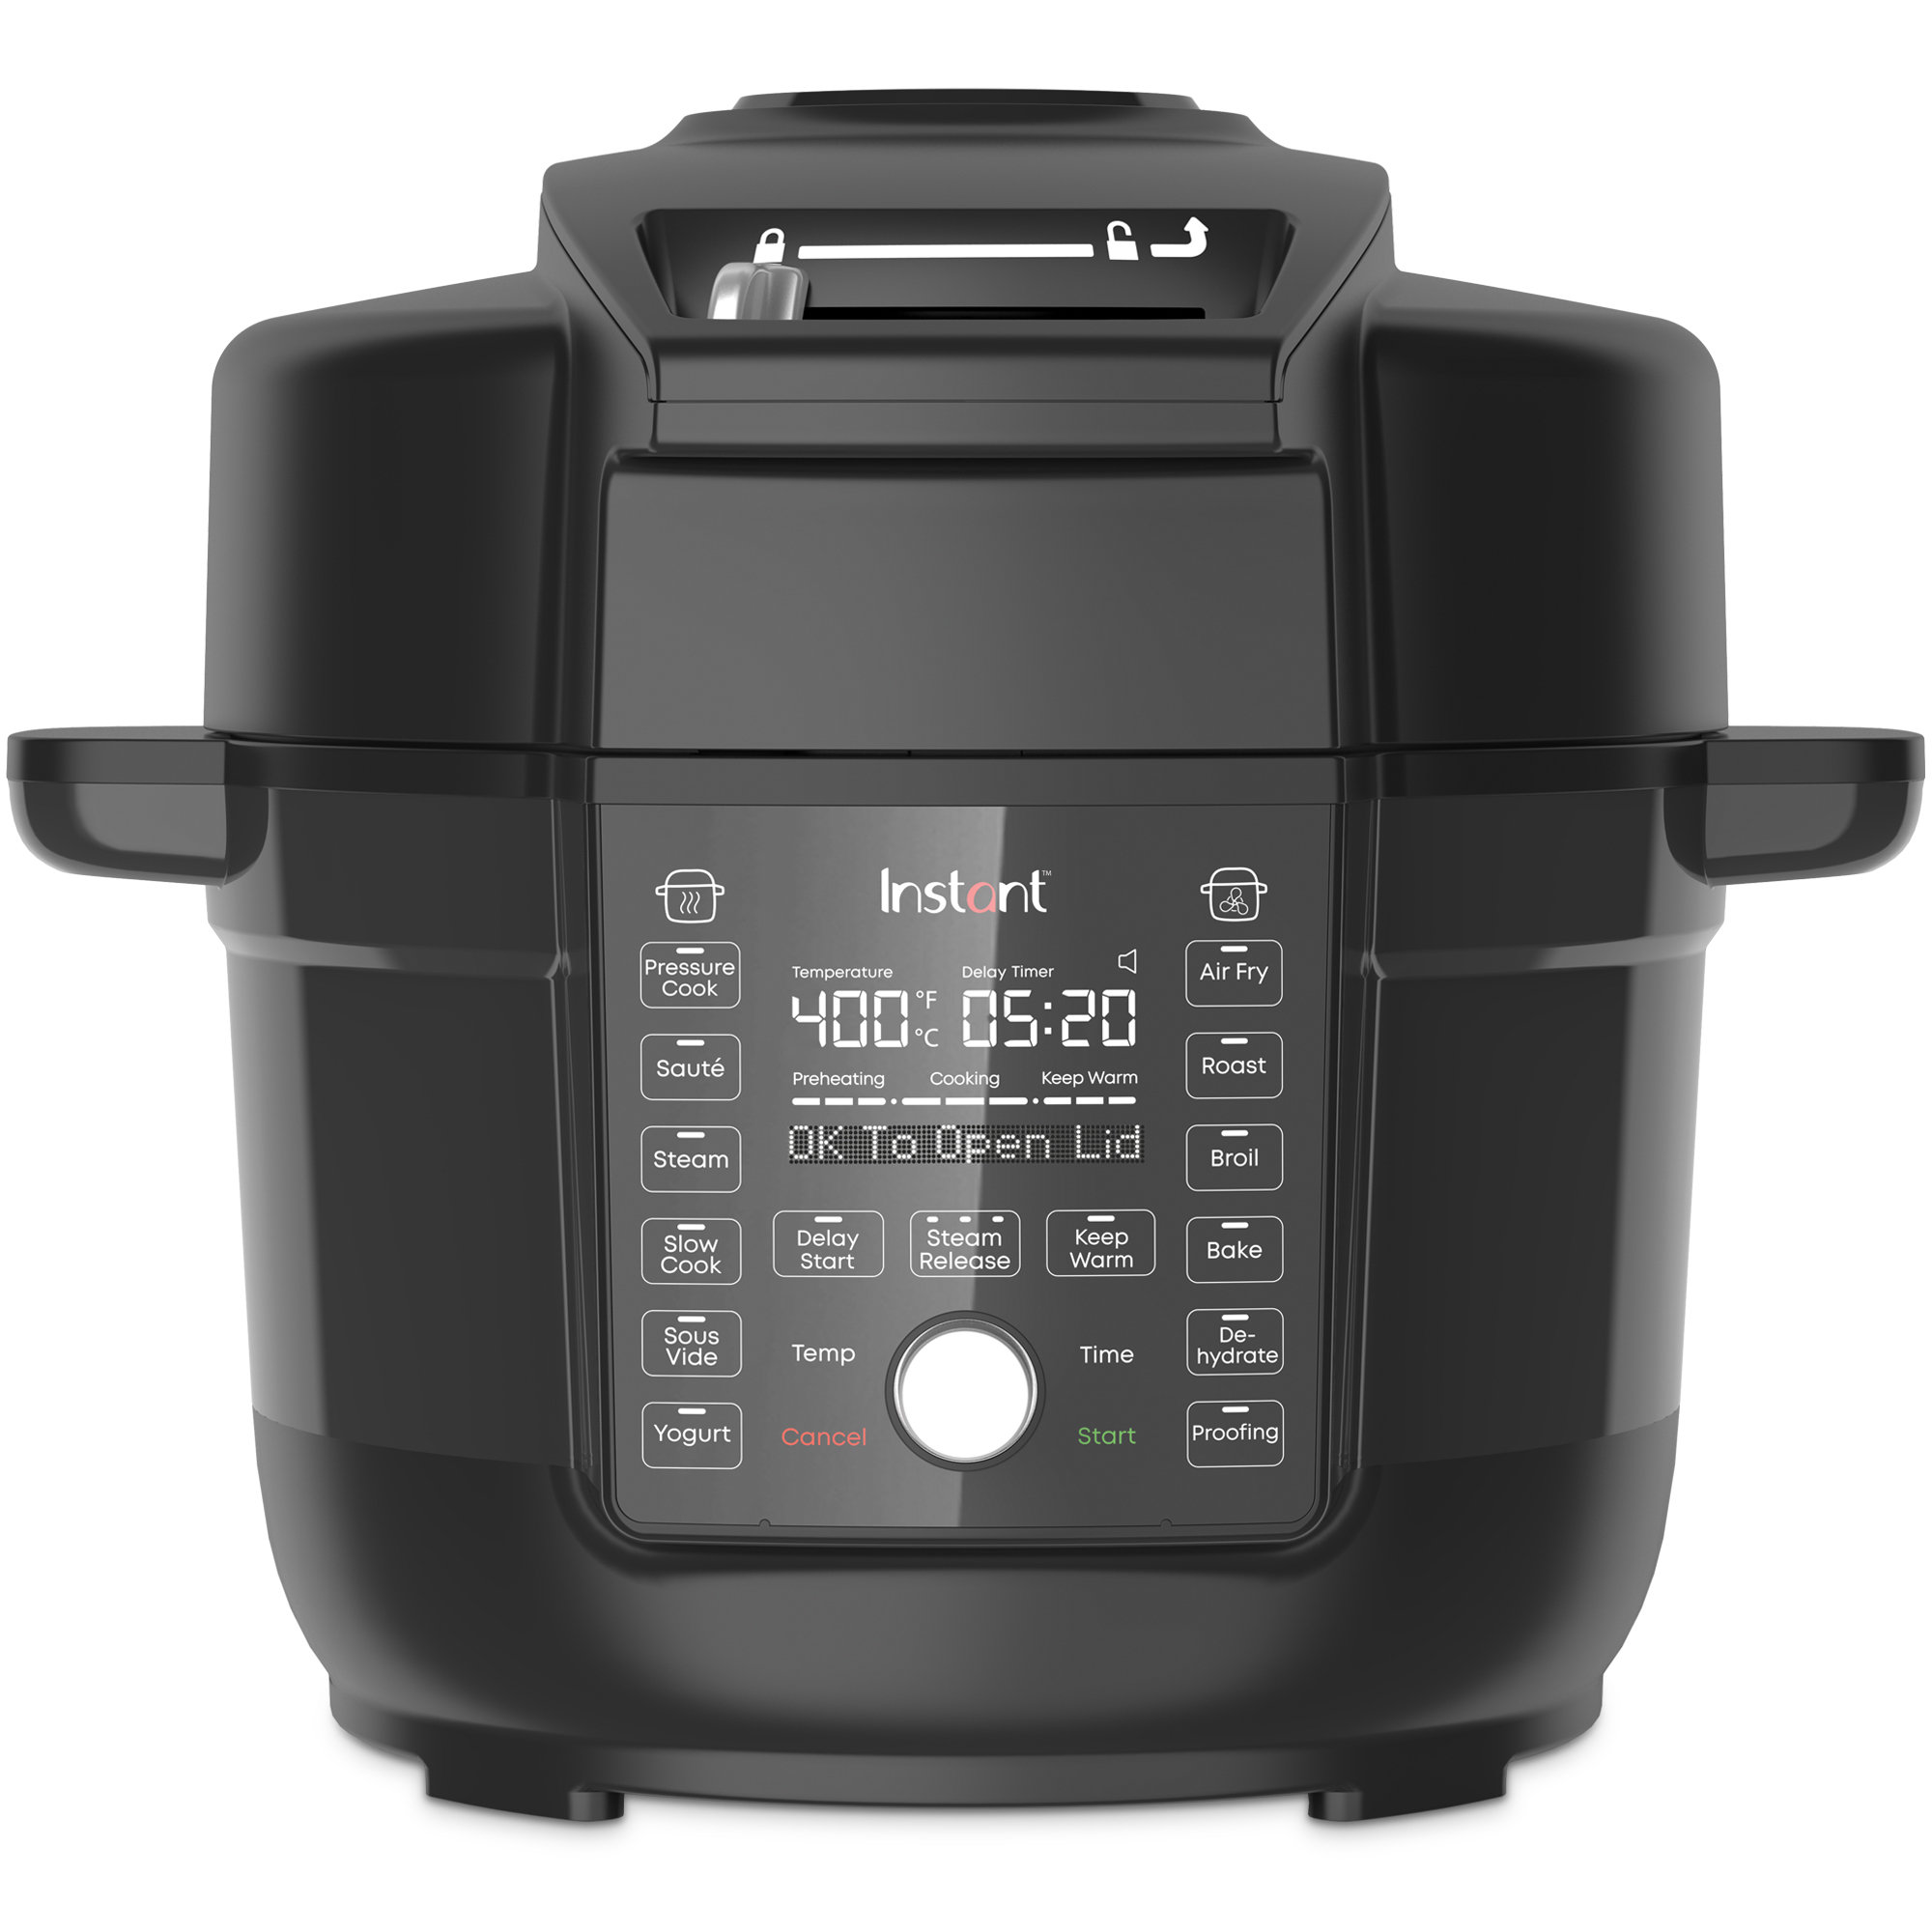 Instant Pot Duo Crisp 6.5-quart with Ultimate Lid Multi-Cooker and